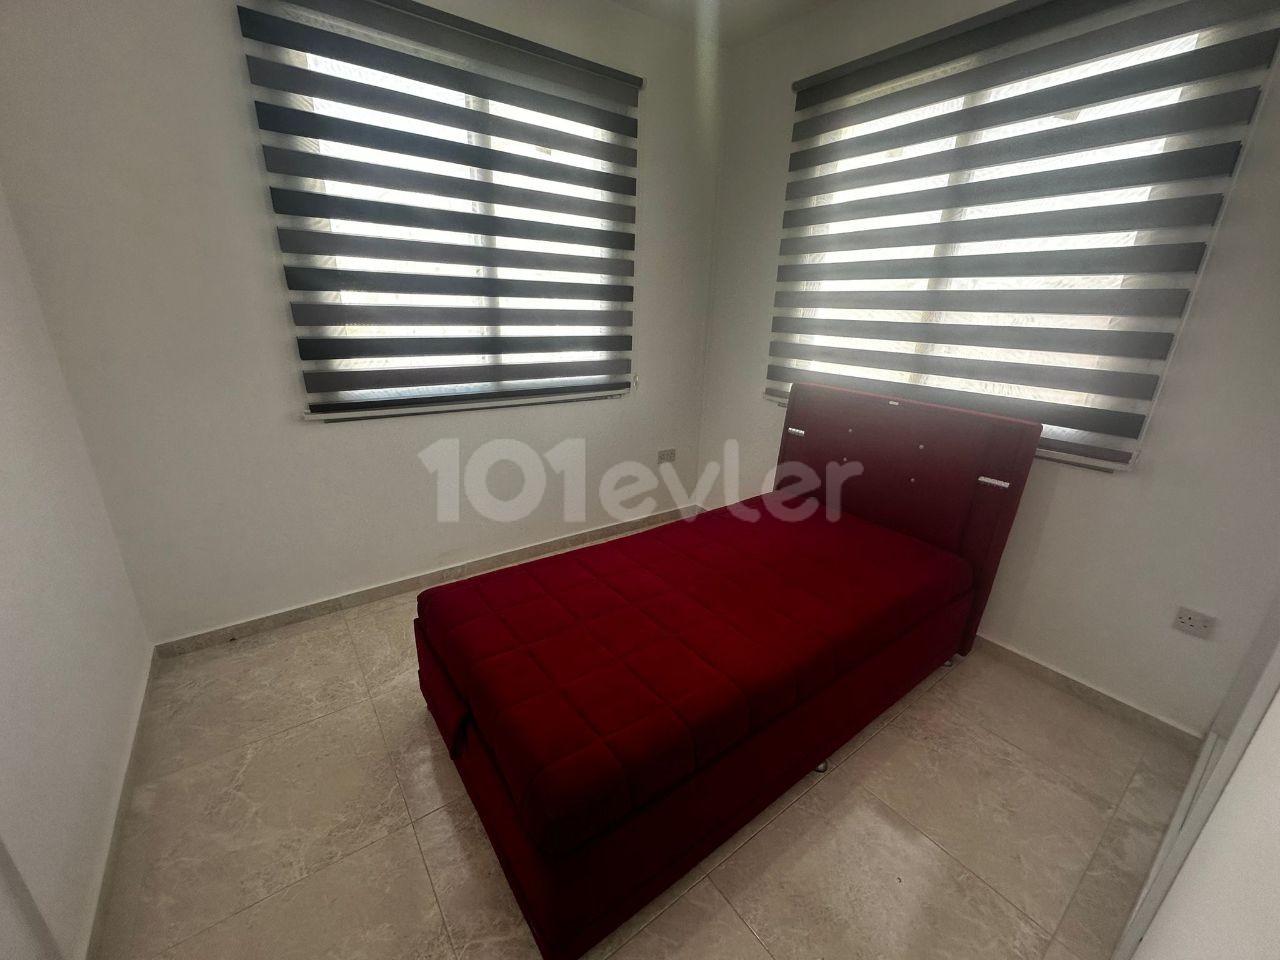 NEW NEW 2+1 FURNISHED FLAT FOR RENT IN KIZILBAŞ AREA